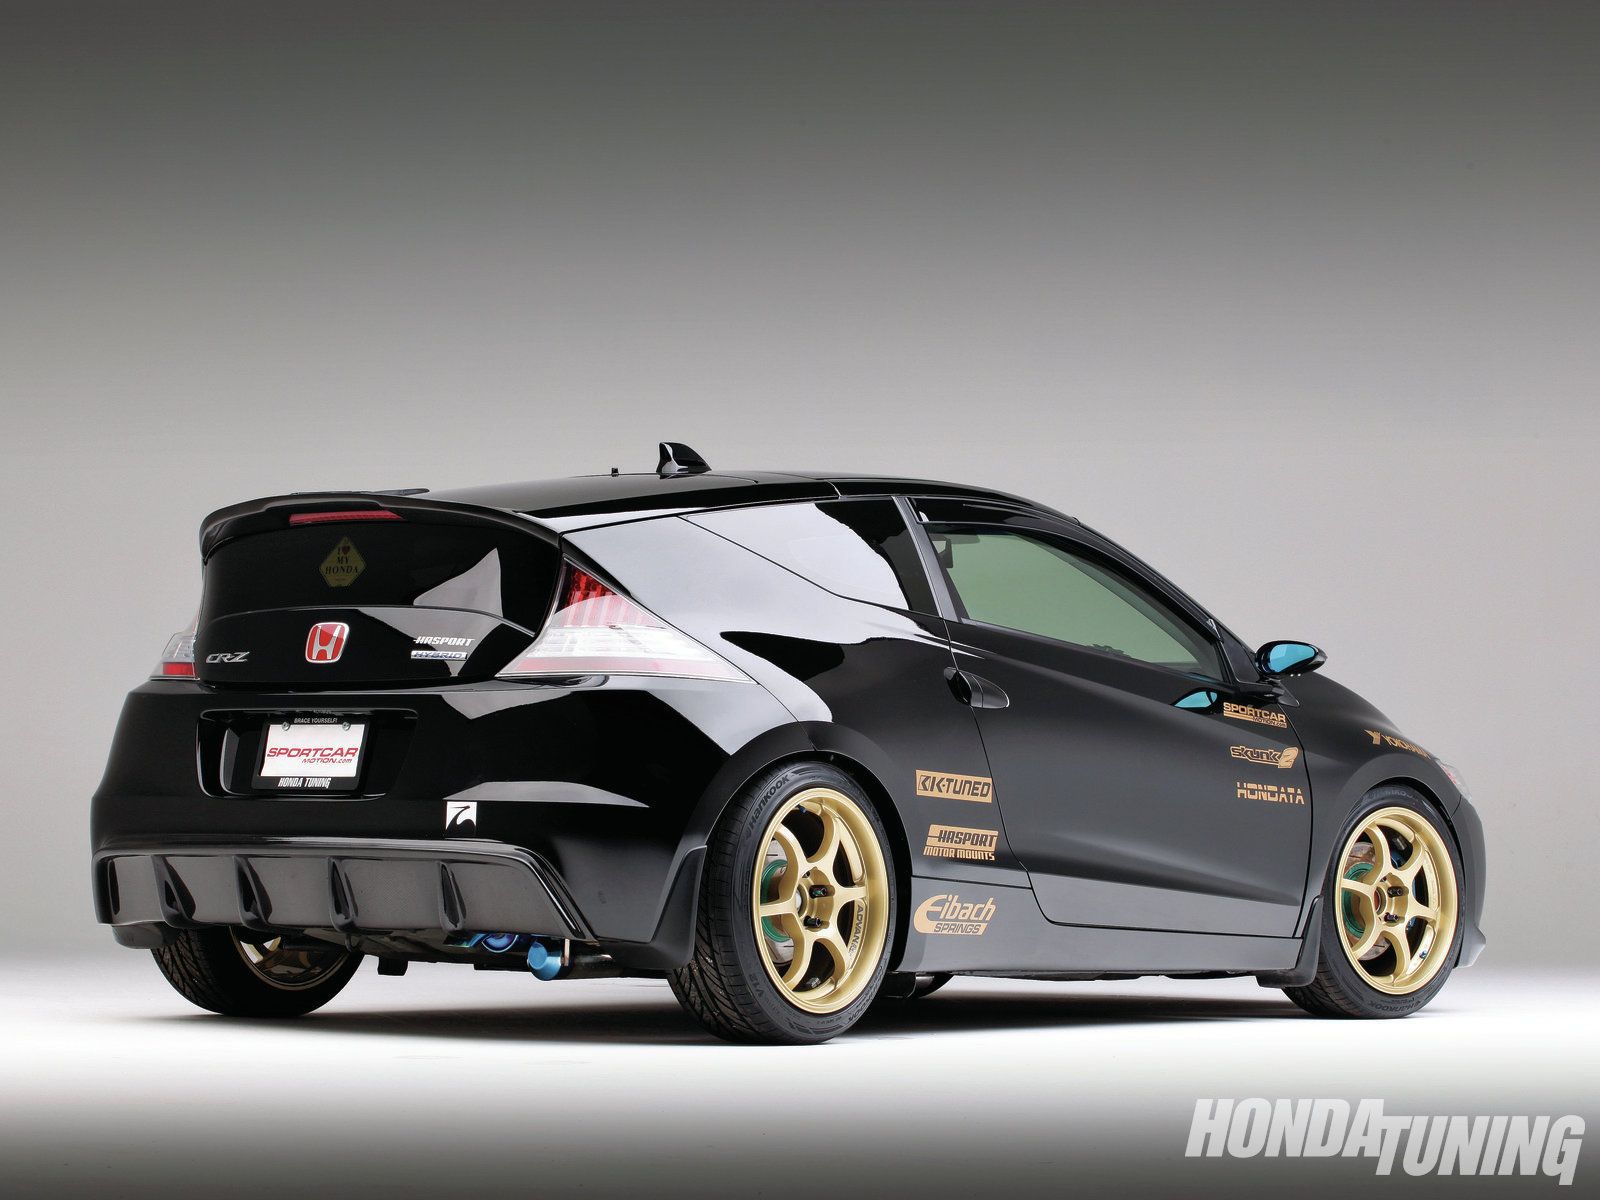 Honda Cr Z Wallpapers Vehicles Hq Honda Cr Z Pictures 4k Wallpapers 19